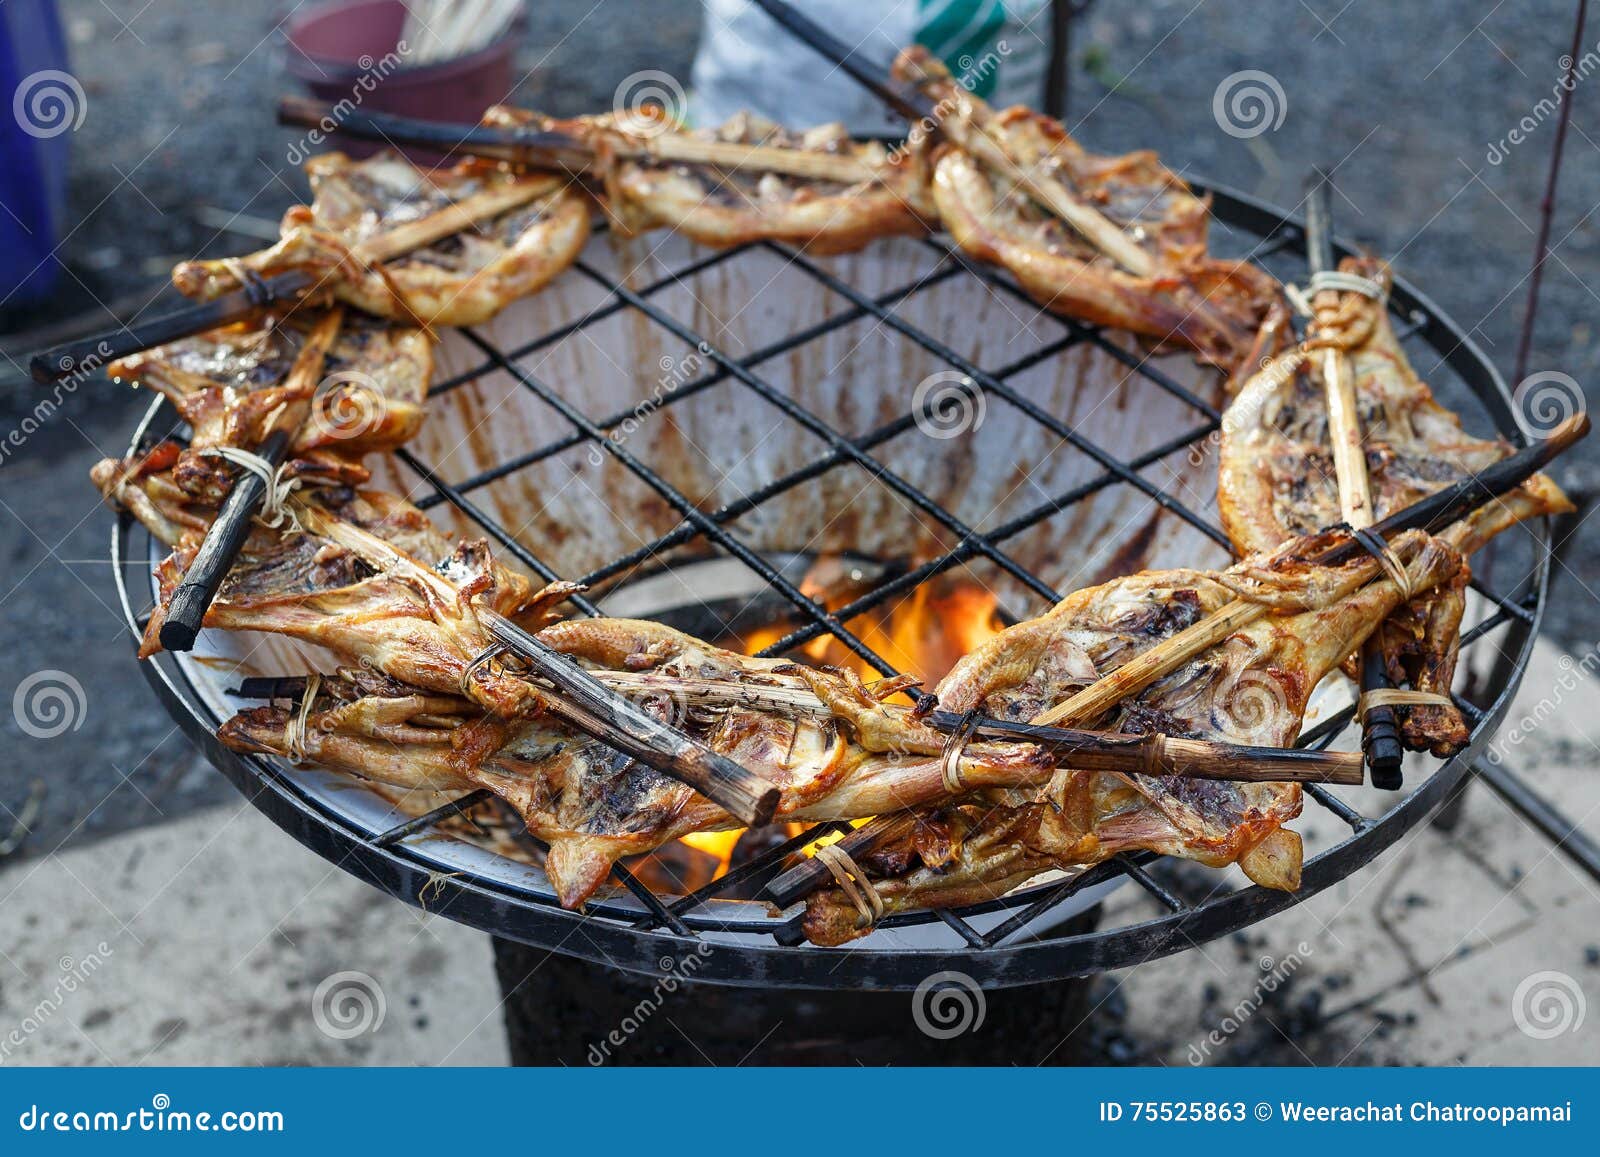 Grilled chicken tasty stock image. Image of grilled, roast - 75525863